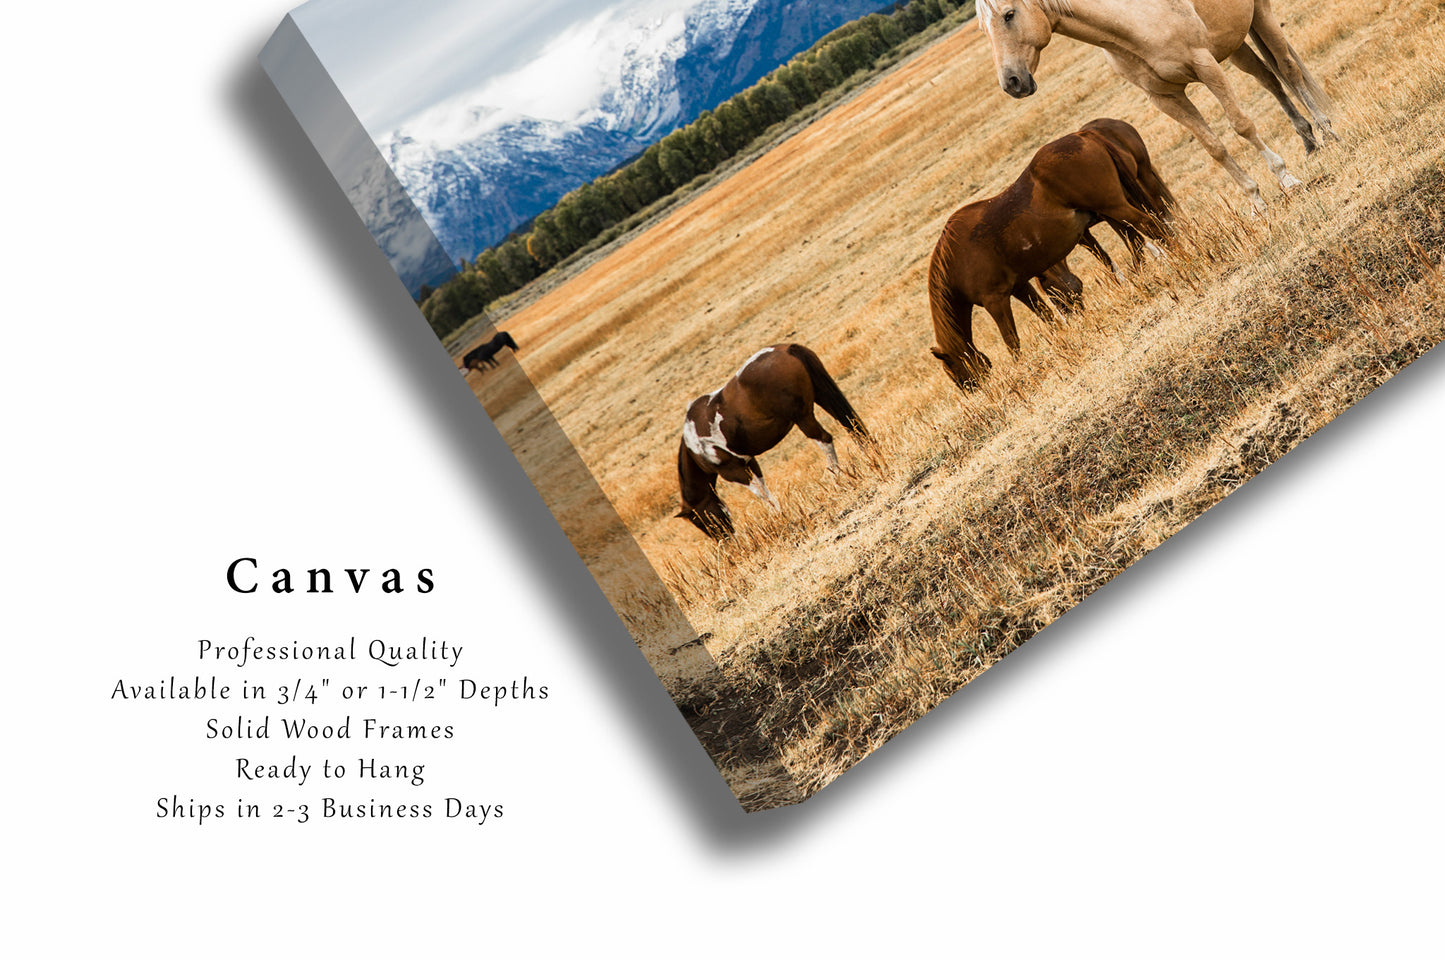 Western Canvas Wall Art - Gallery Wrap of Palomino Horse Posing in Grand Teton National Park Wyoming - Equine Photography Artwork Decor